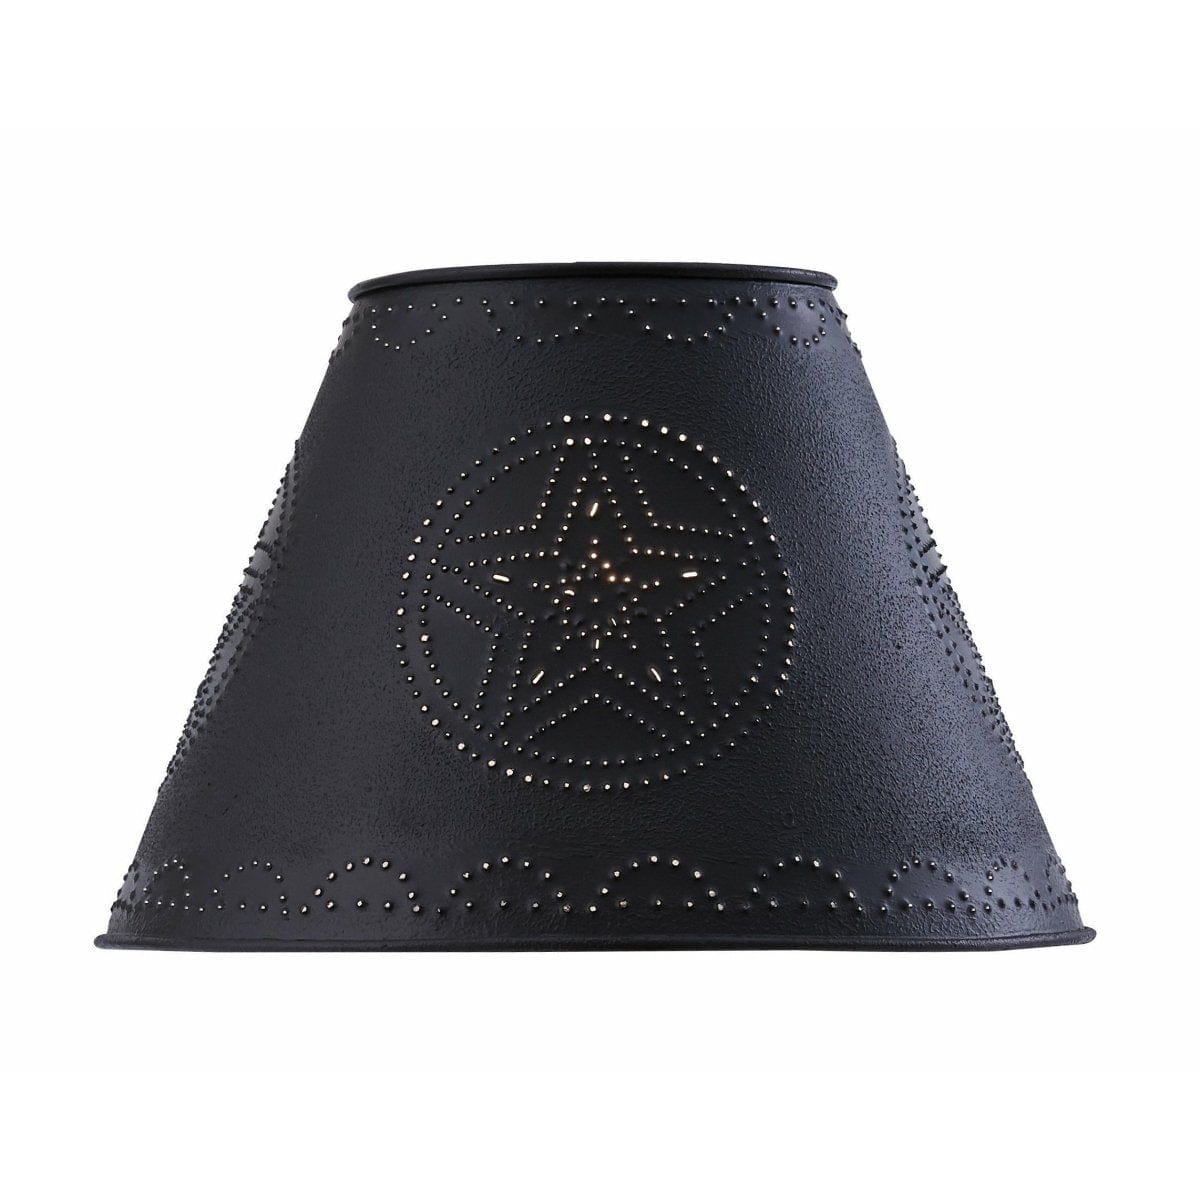 Star In Black Punched Tin Lamp Shade 10" Diameter-Park Designs-The Village Merchant